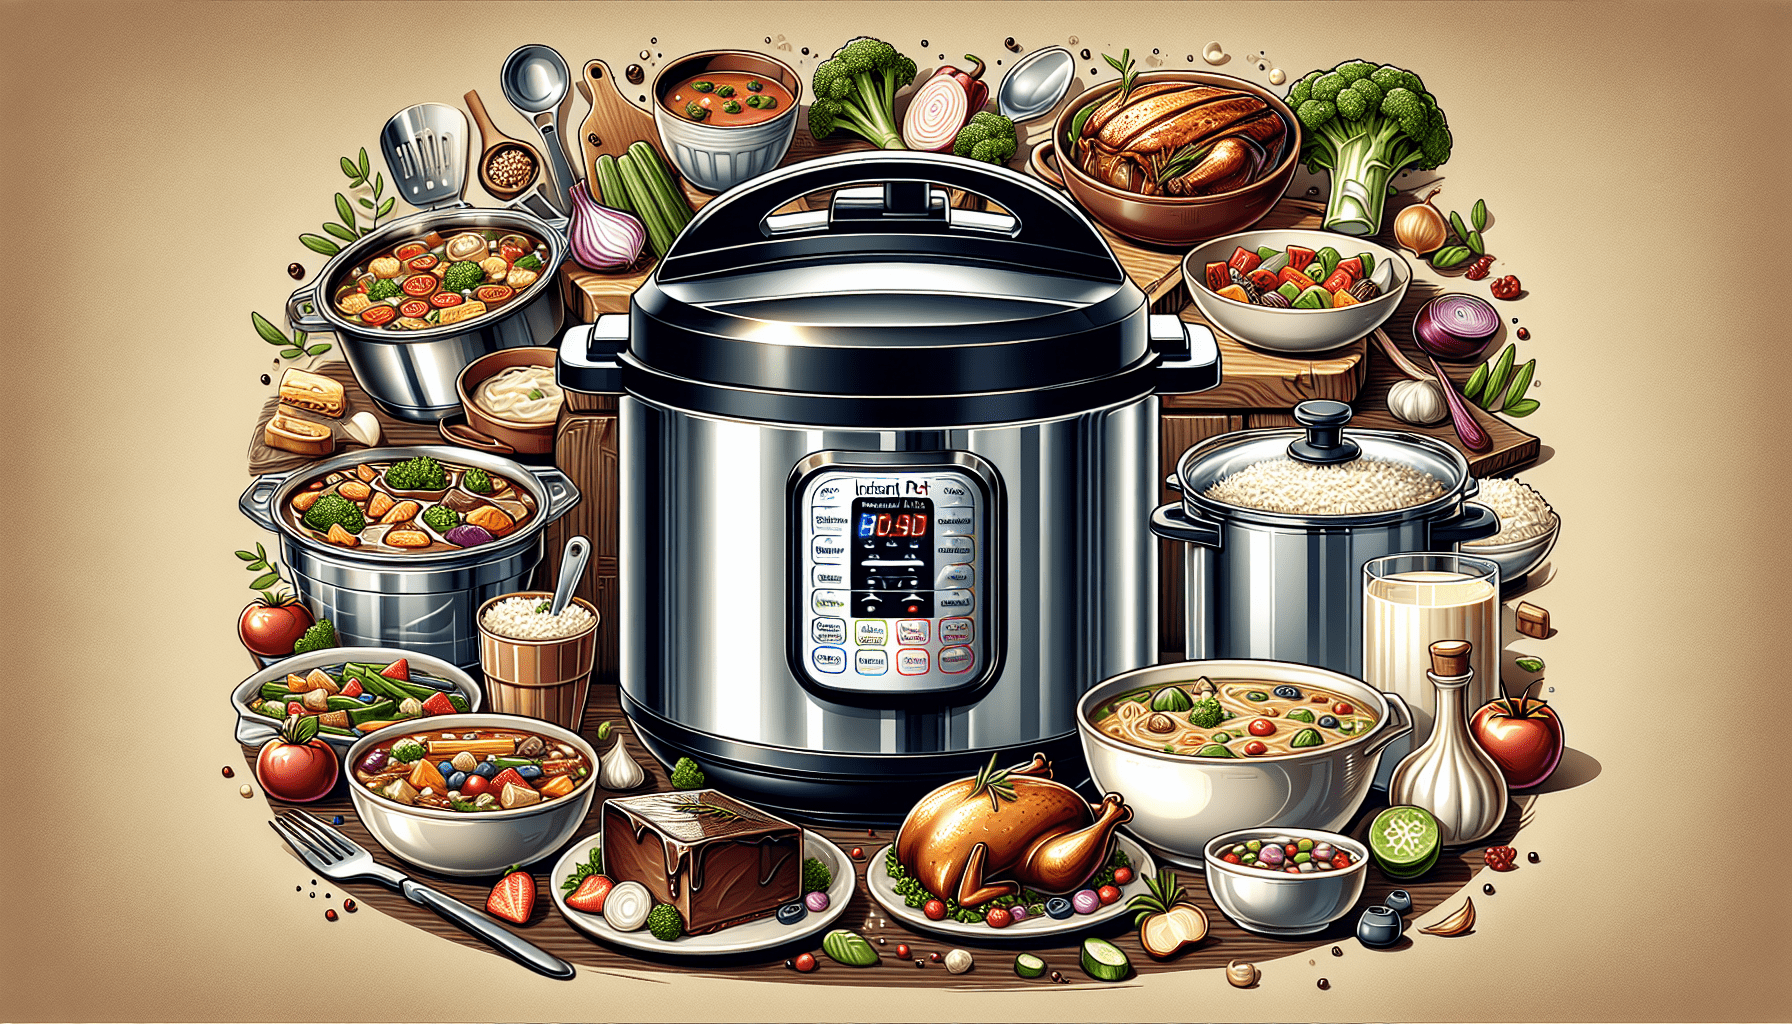 10 Delicious Recipes You Can Make with the Instant Pot Lux